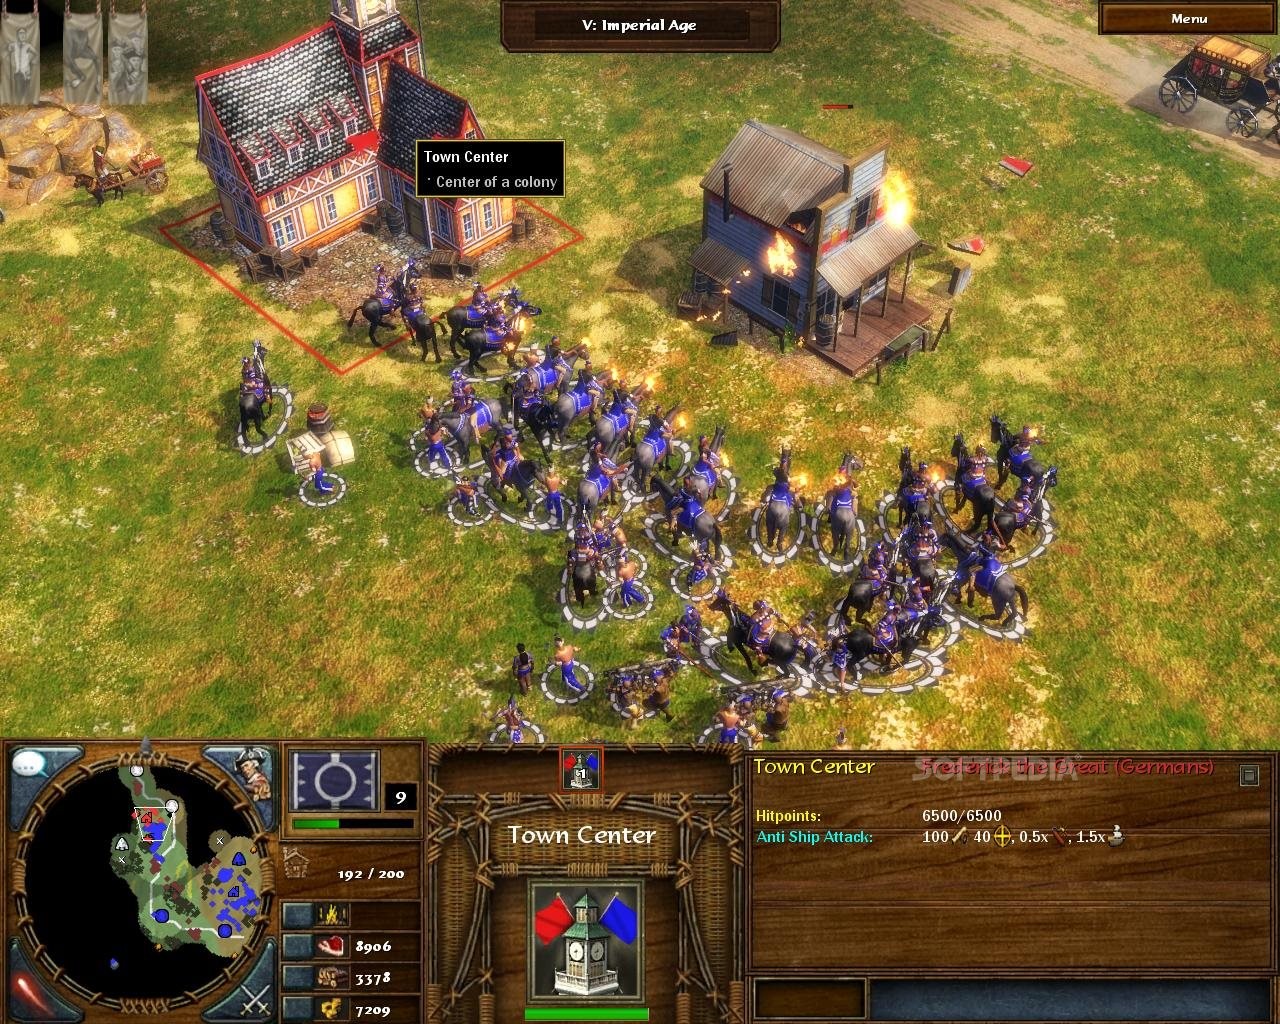 age of empires 3 warchiefs mac download